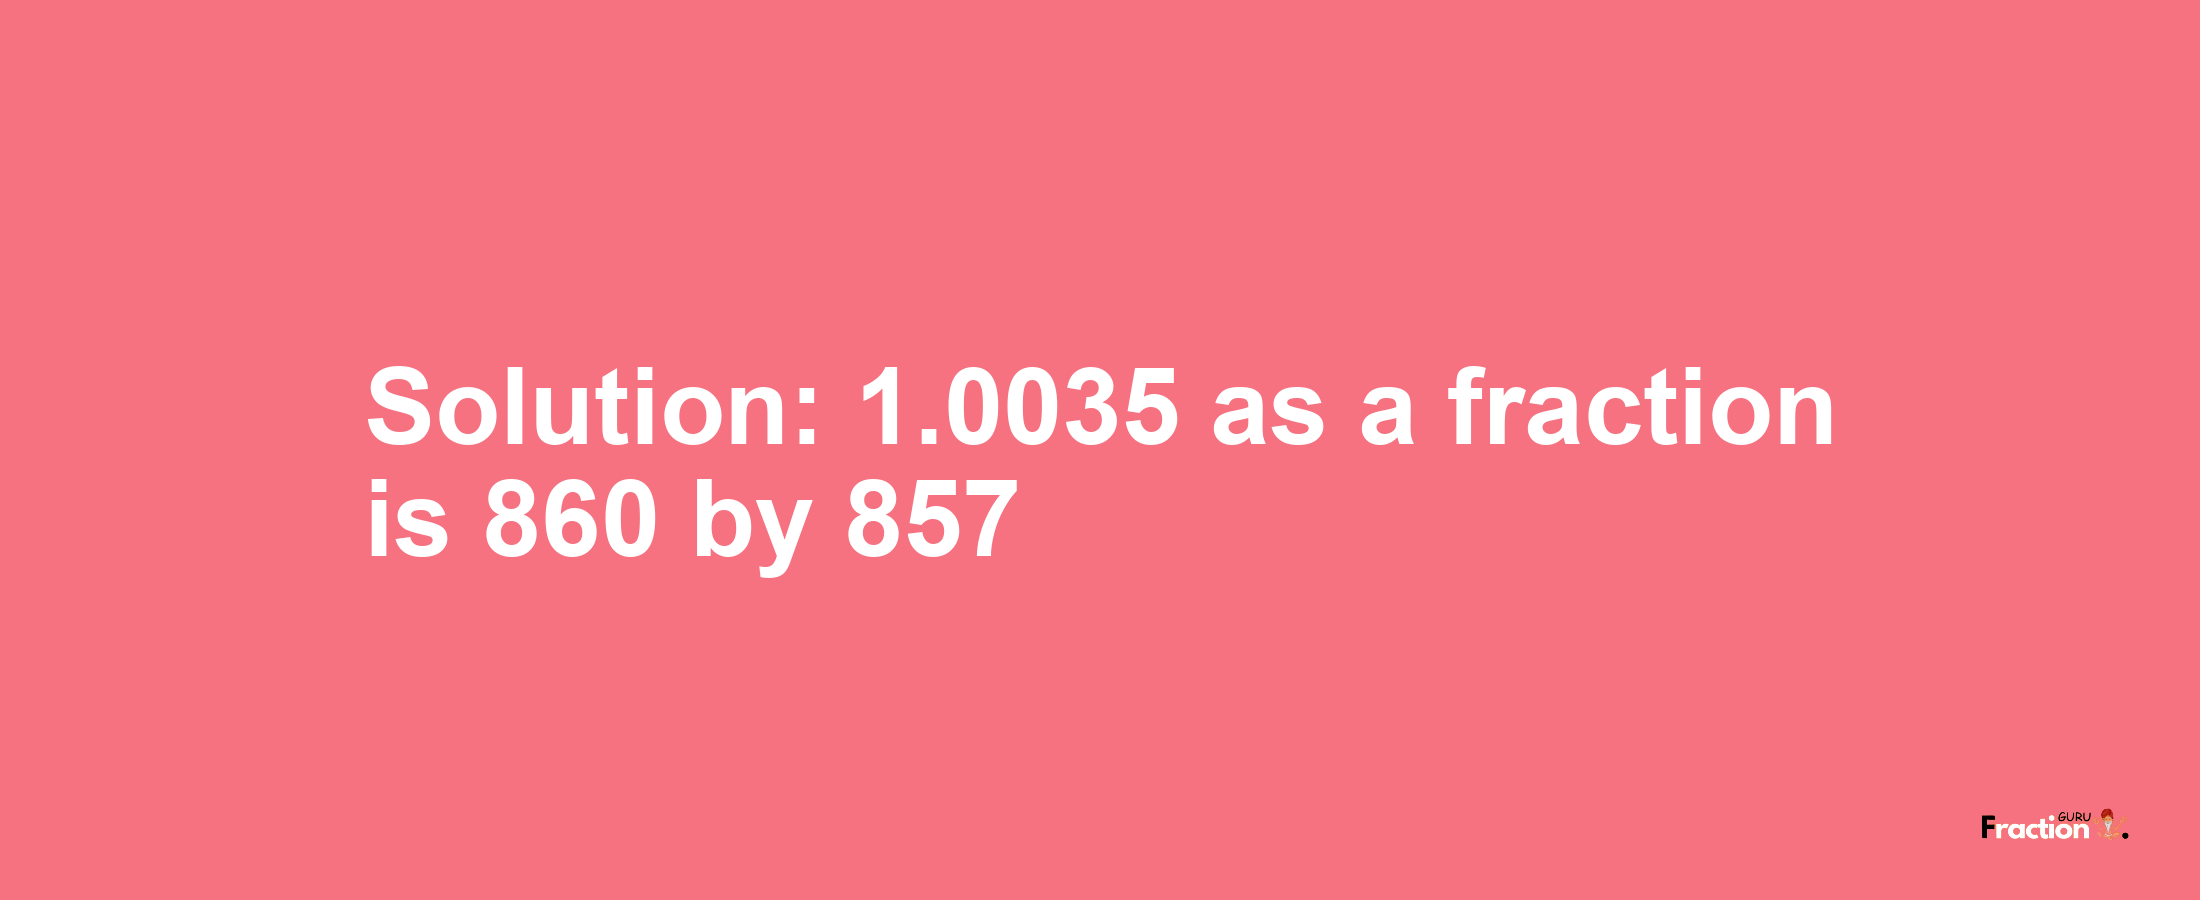 Solution:1.0035 as a fraction is 860/857